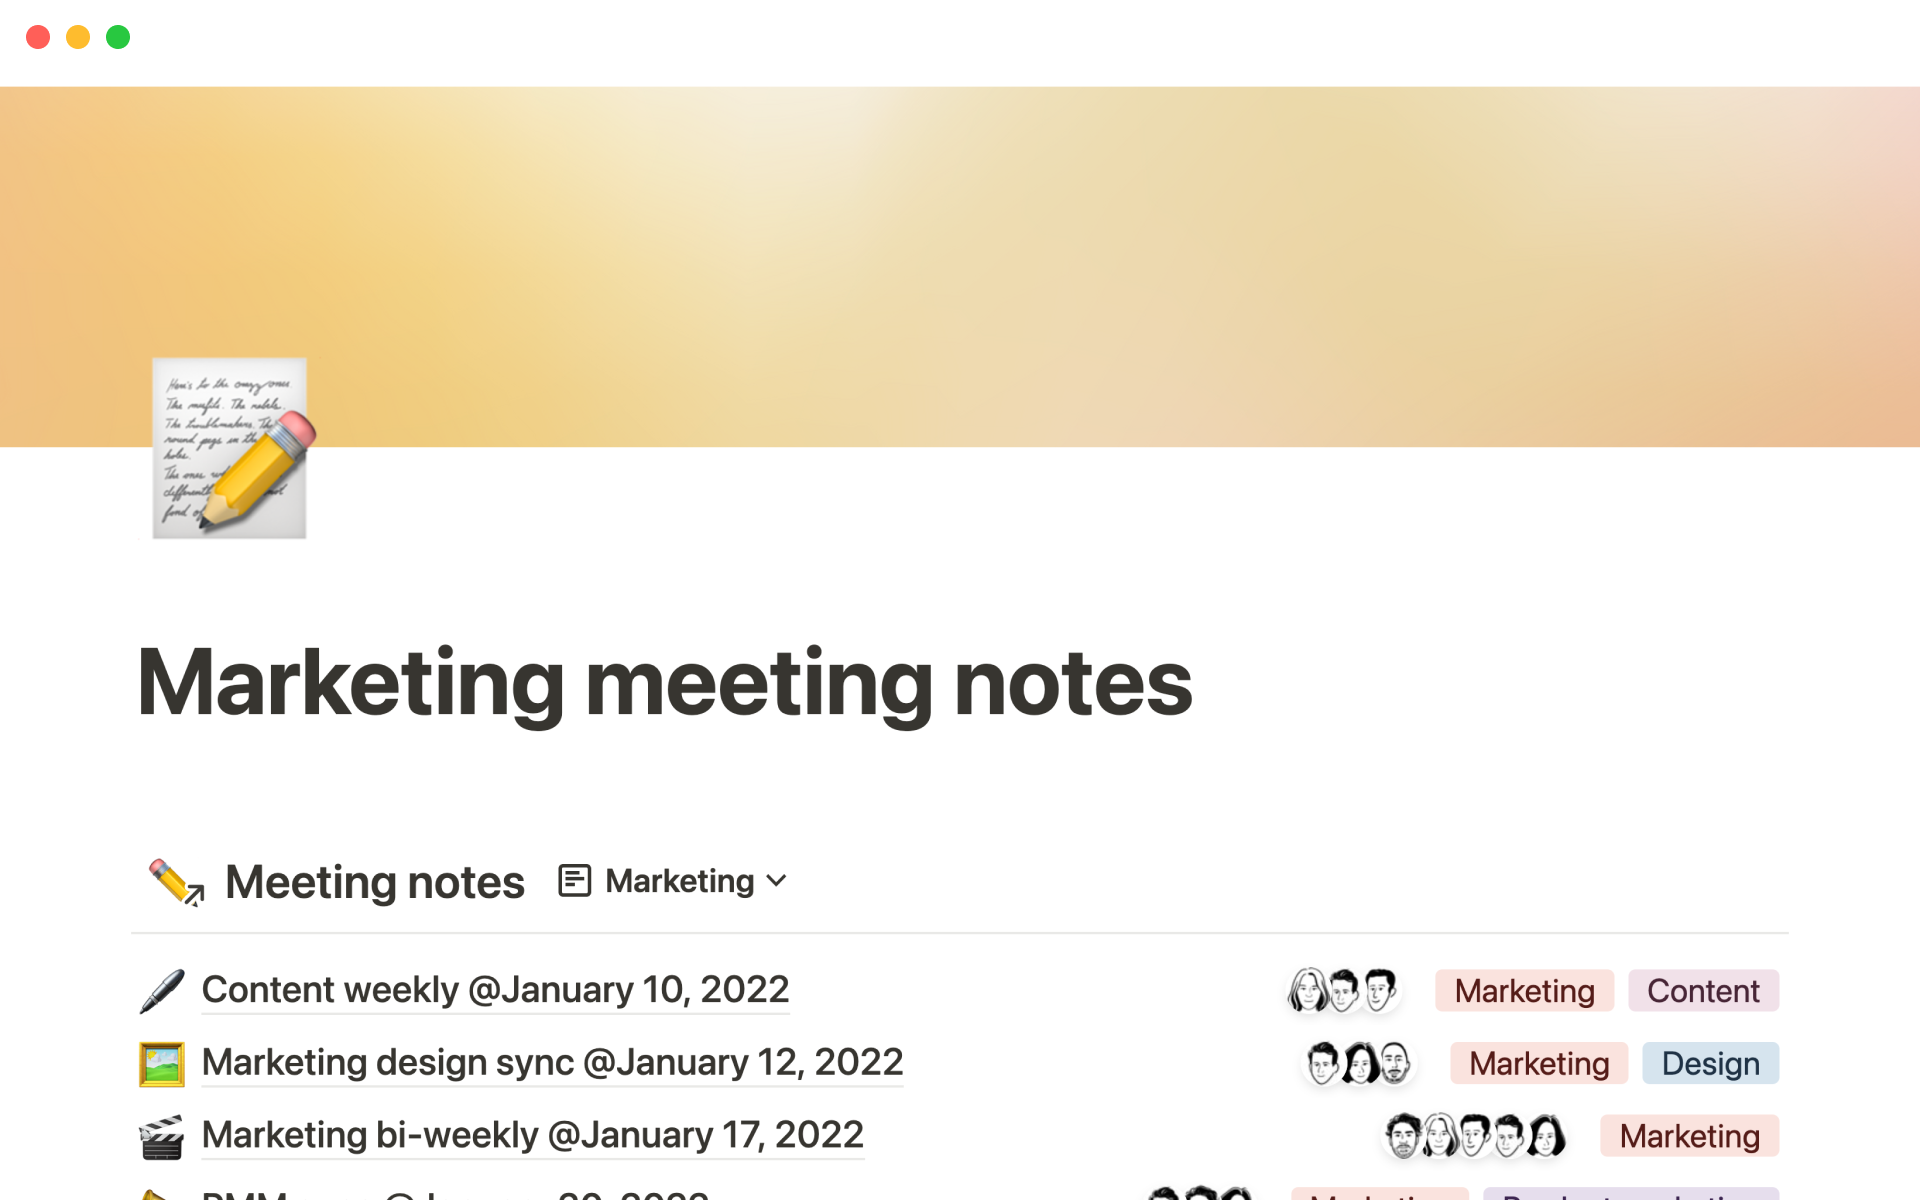 Build transparency among your teams and consolidate all your meeting notes into one single source of truth.